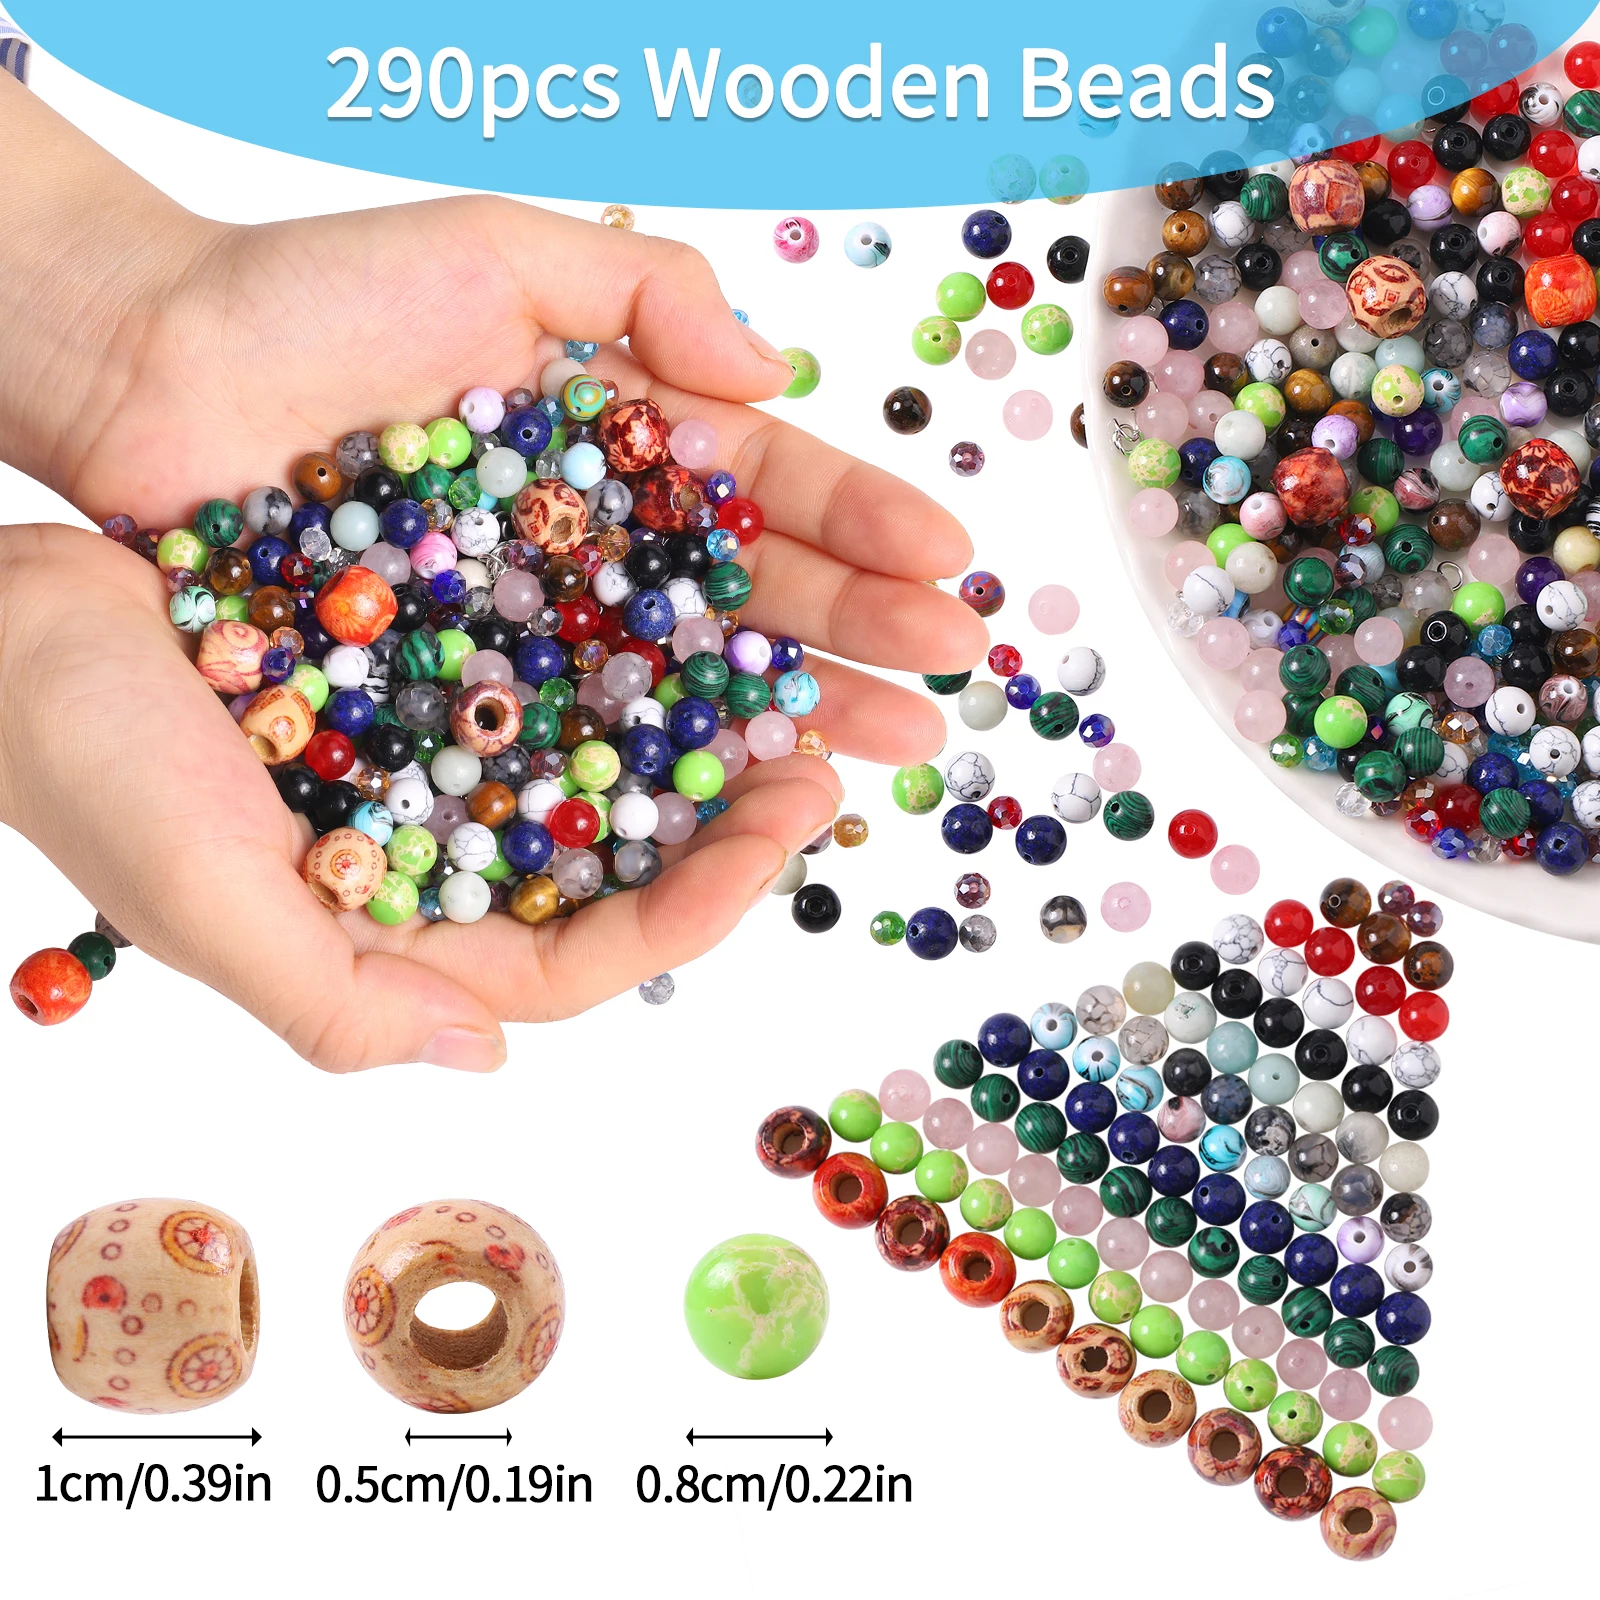 290pcs Wood Handmade DIY Mixed Alphabet Letter Beads send tools Charms Beads for Making Jewelry Handmade Bracelets Accessories 2 pc socket nut electric wood head soldering station iron handle accessories for 936 iron head cannula iron tip bushing